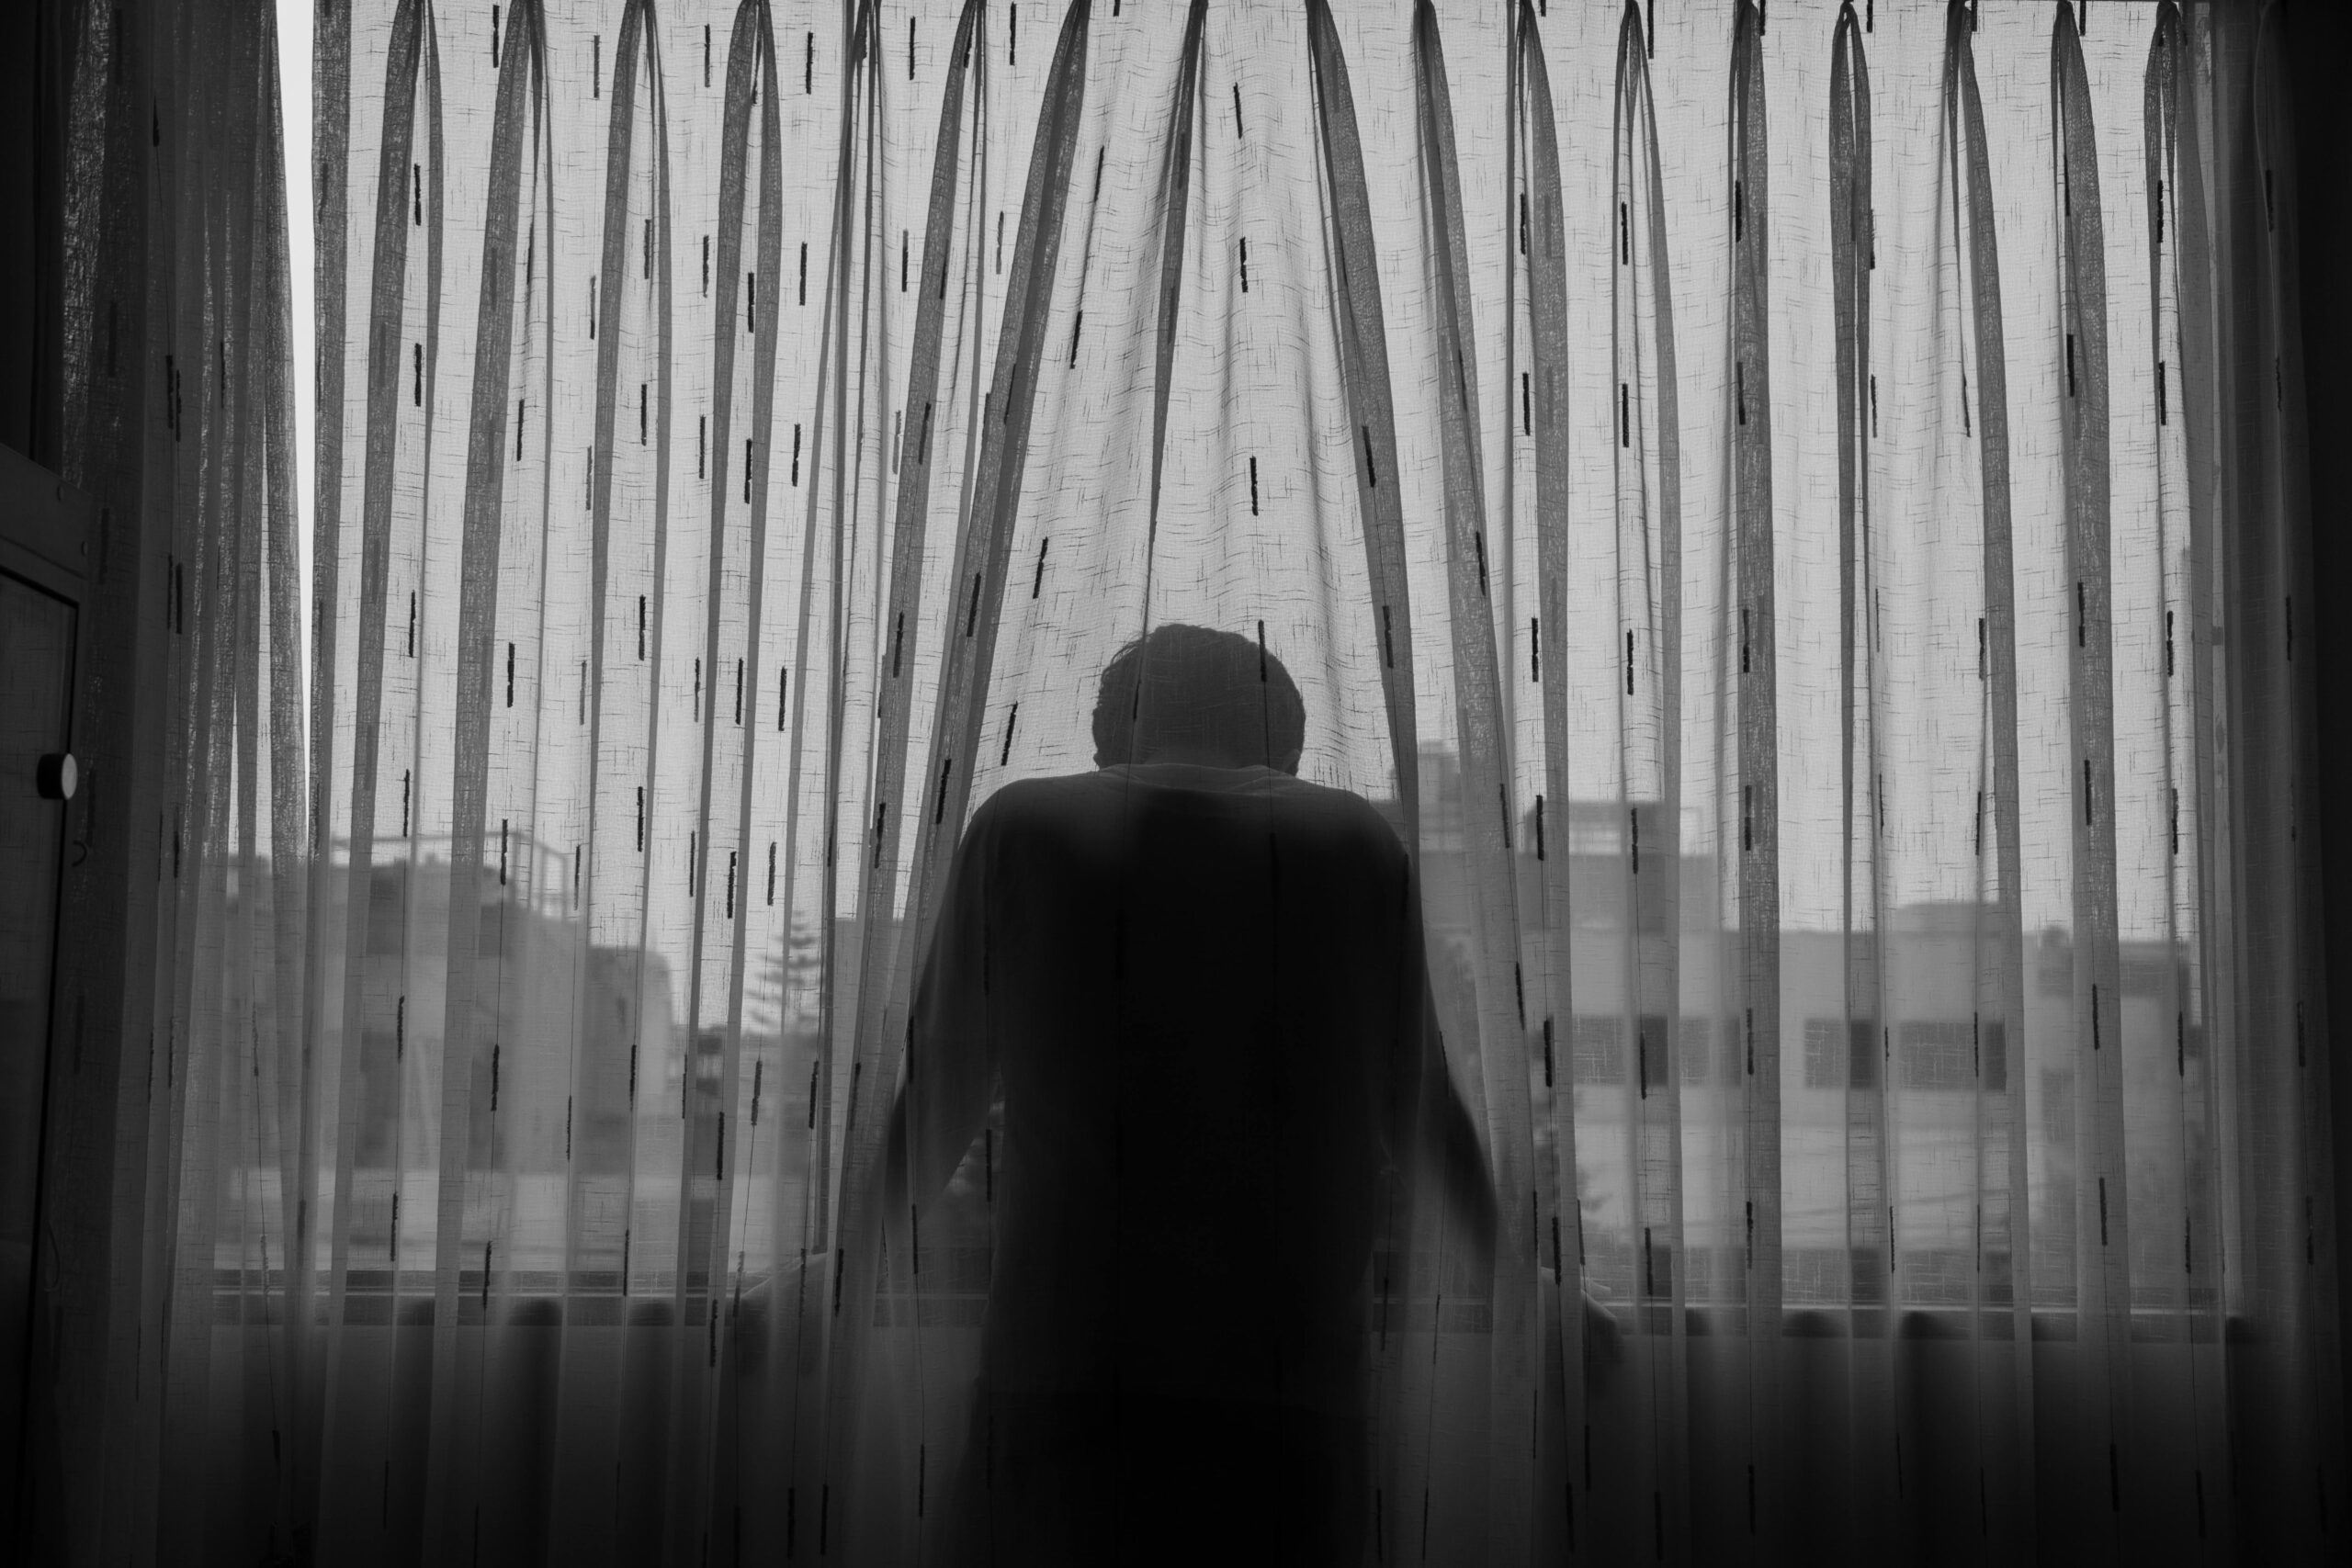 A greyscale photo of a man standing and leaning by the window, covered in sheer curtains.